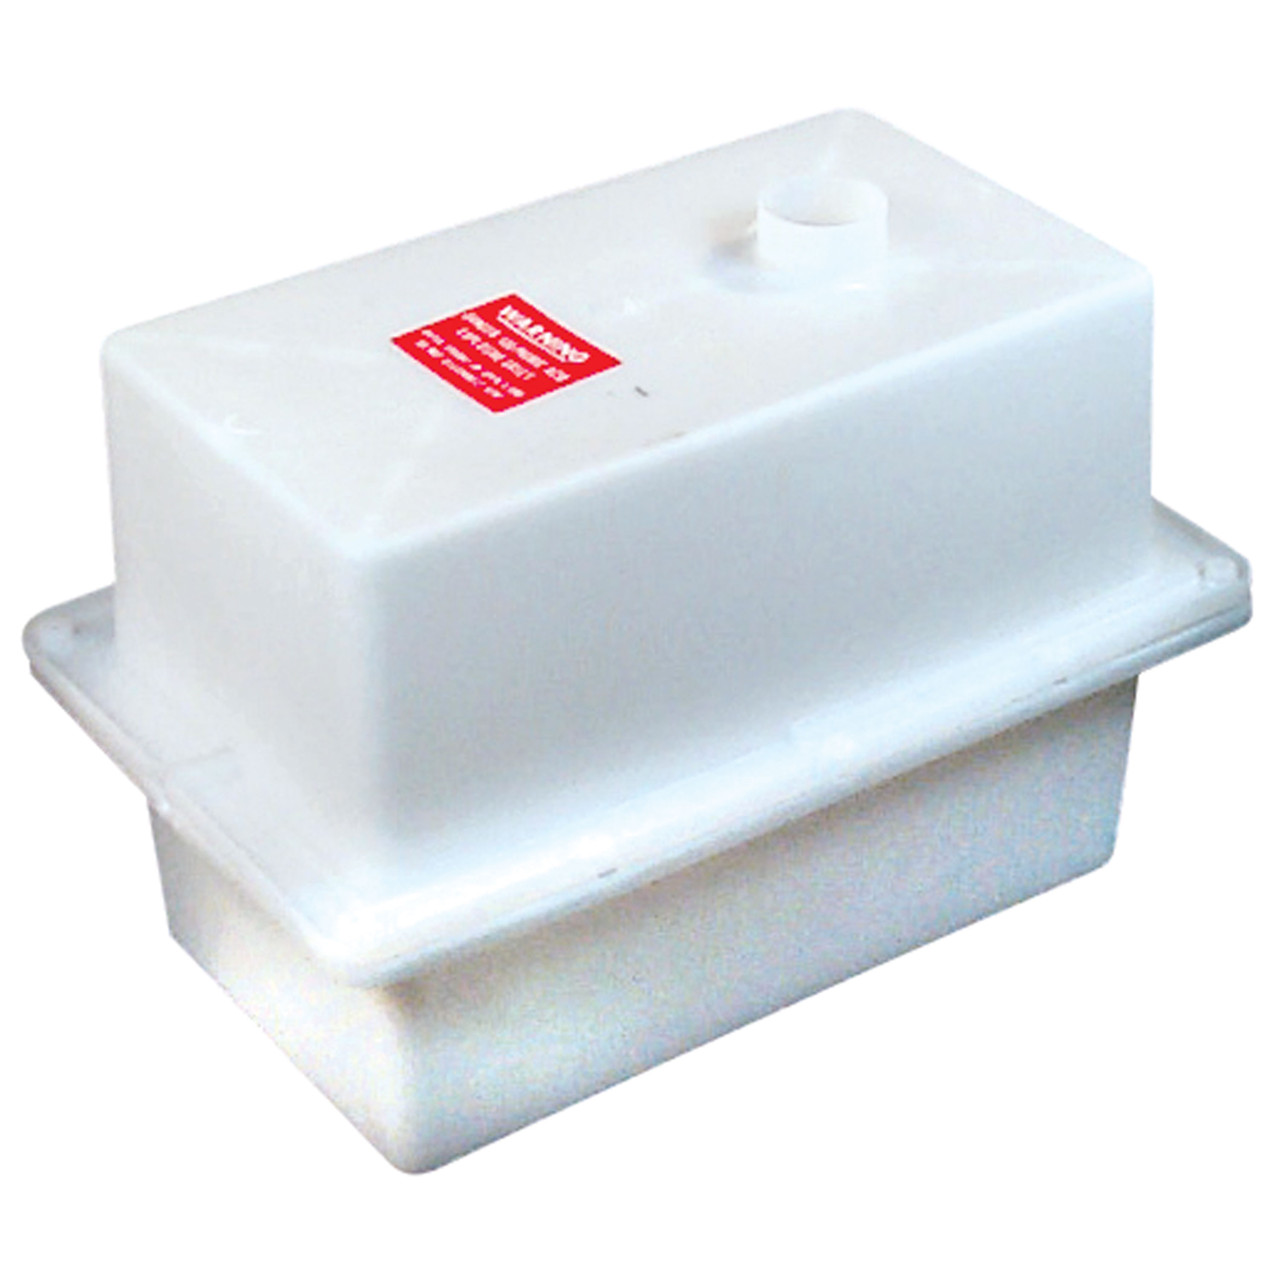 Sea-Dog 415027 Battery Box 27 Series with Strap Vented Polypropylene